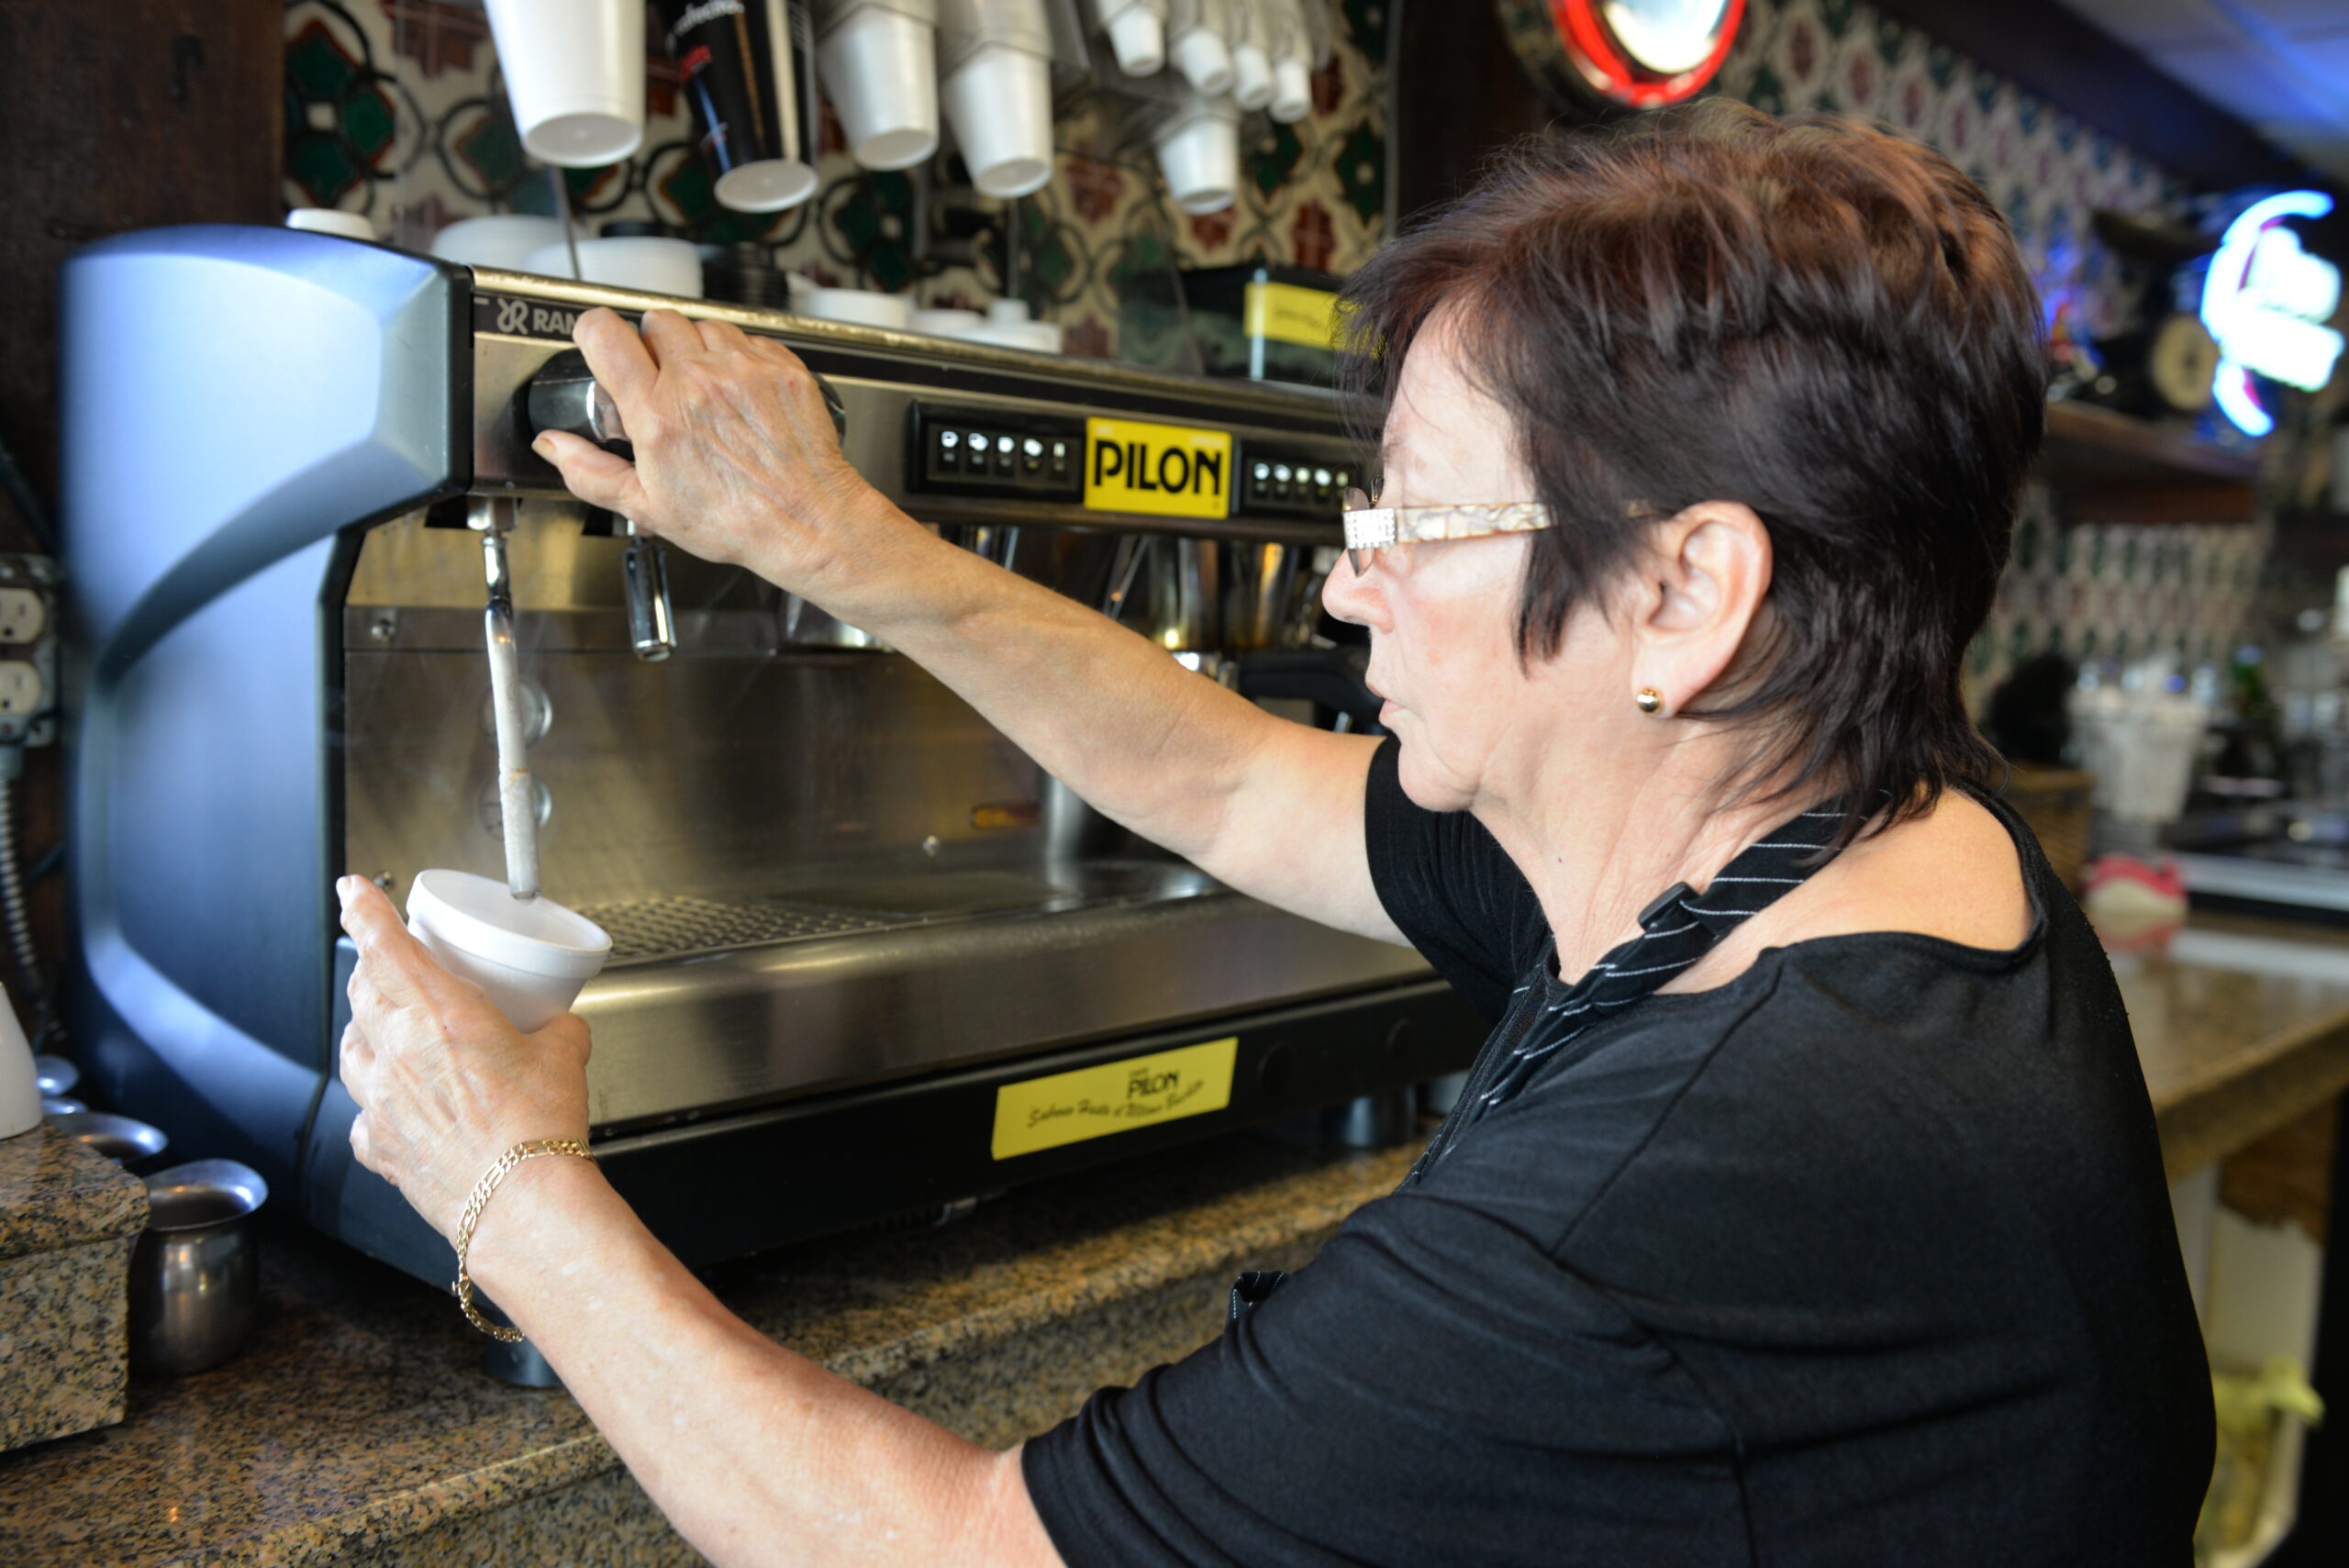 Iris Diaz turns a knob on an espresso machine to froth the milk for a "cafe con leche" she holds in her other hand